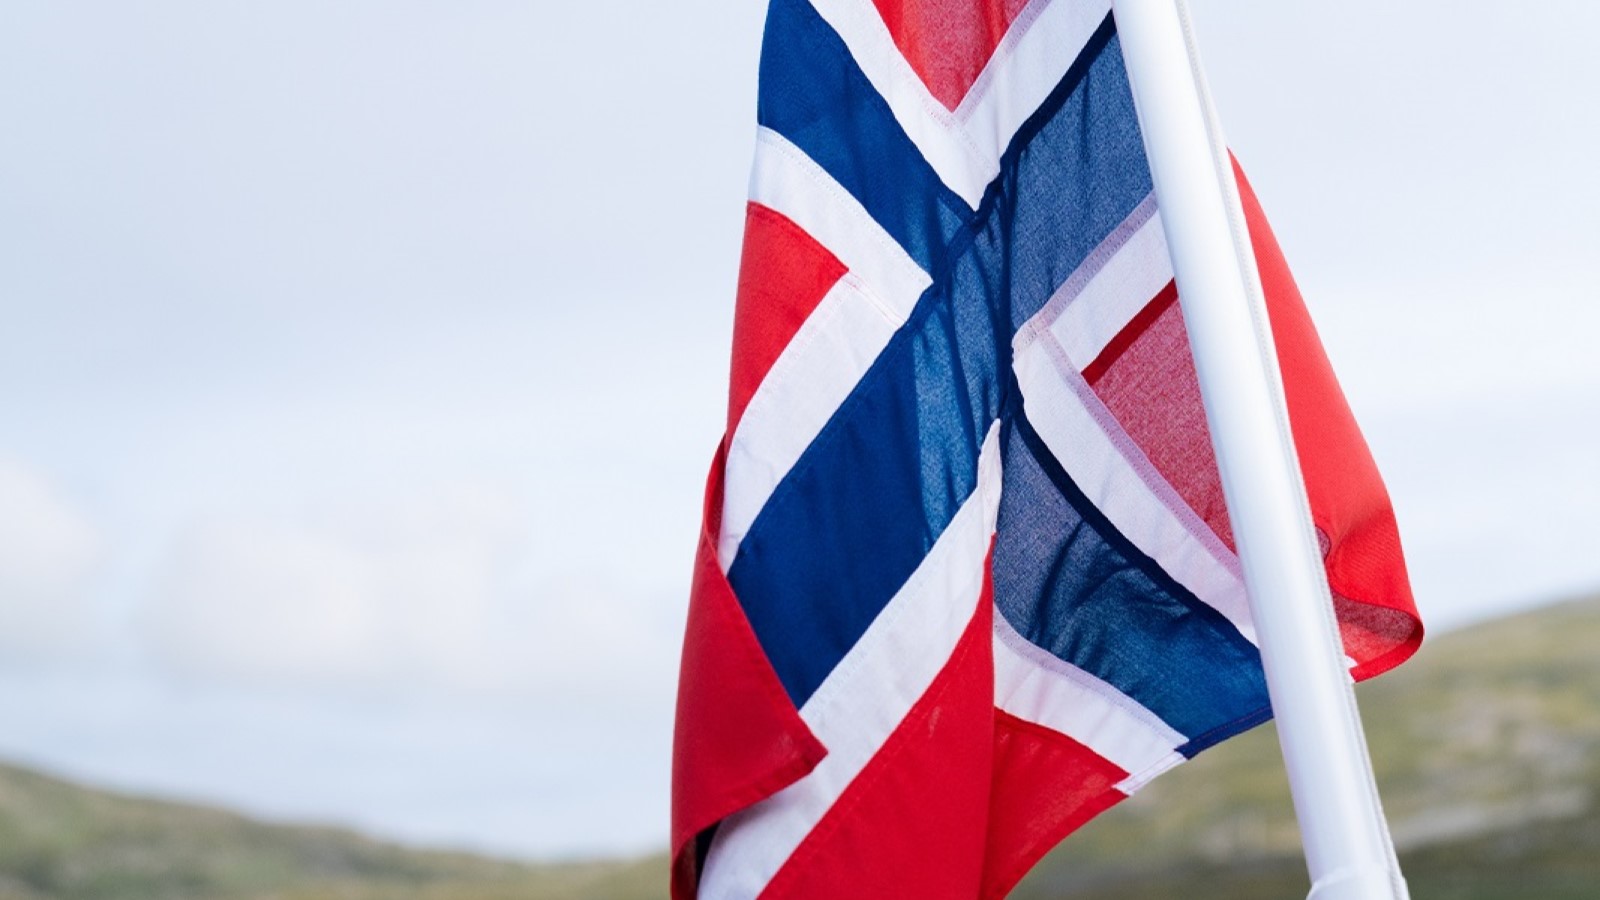 Norweigen flag with green mountains and houses in the background